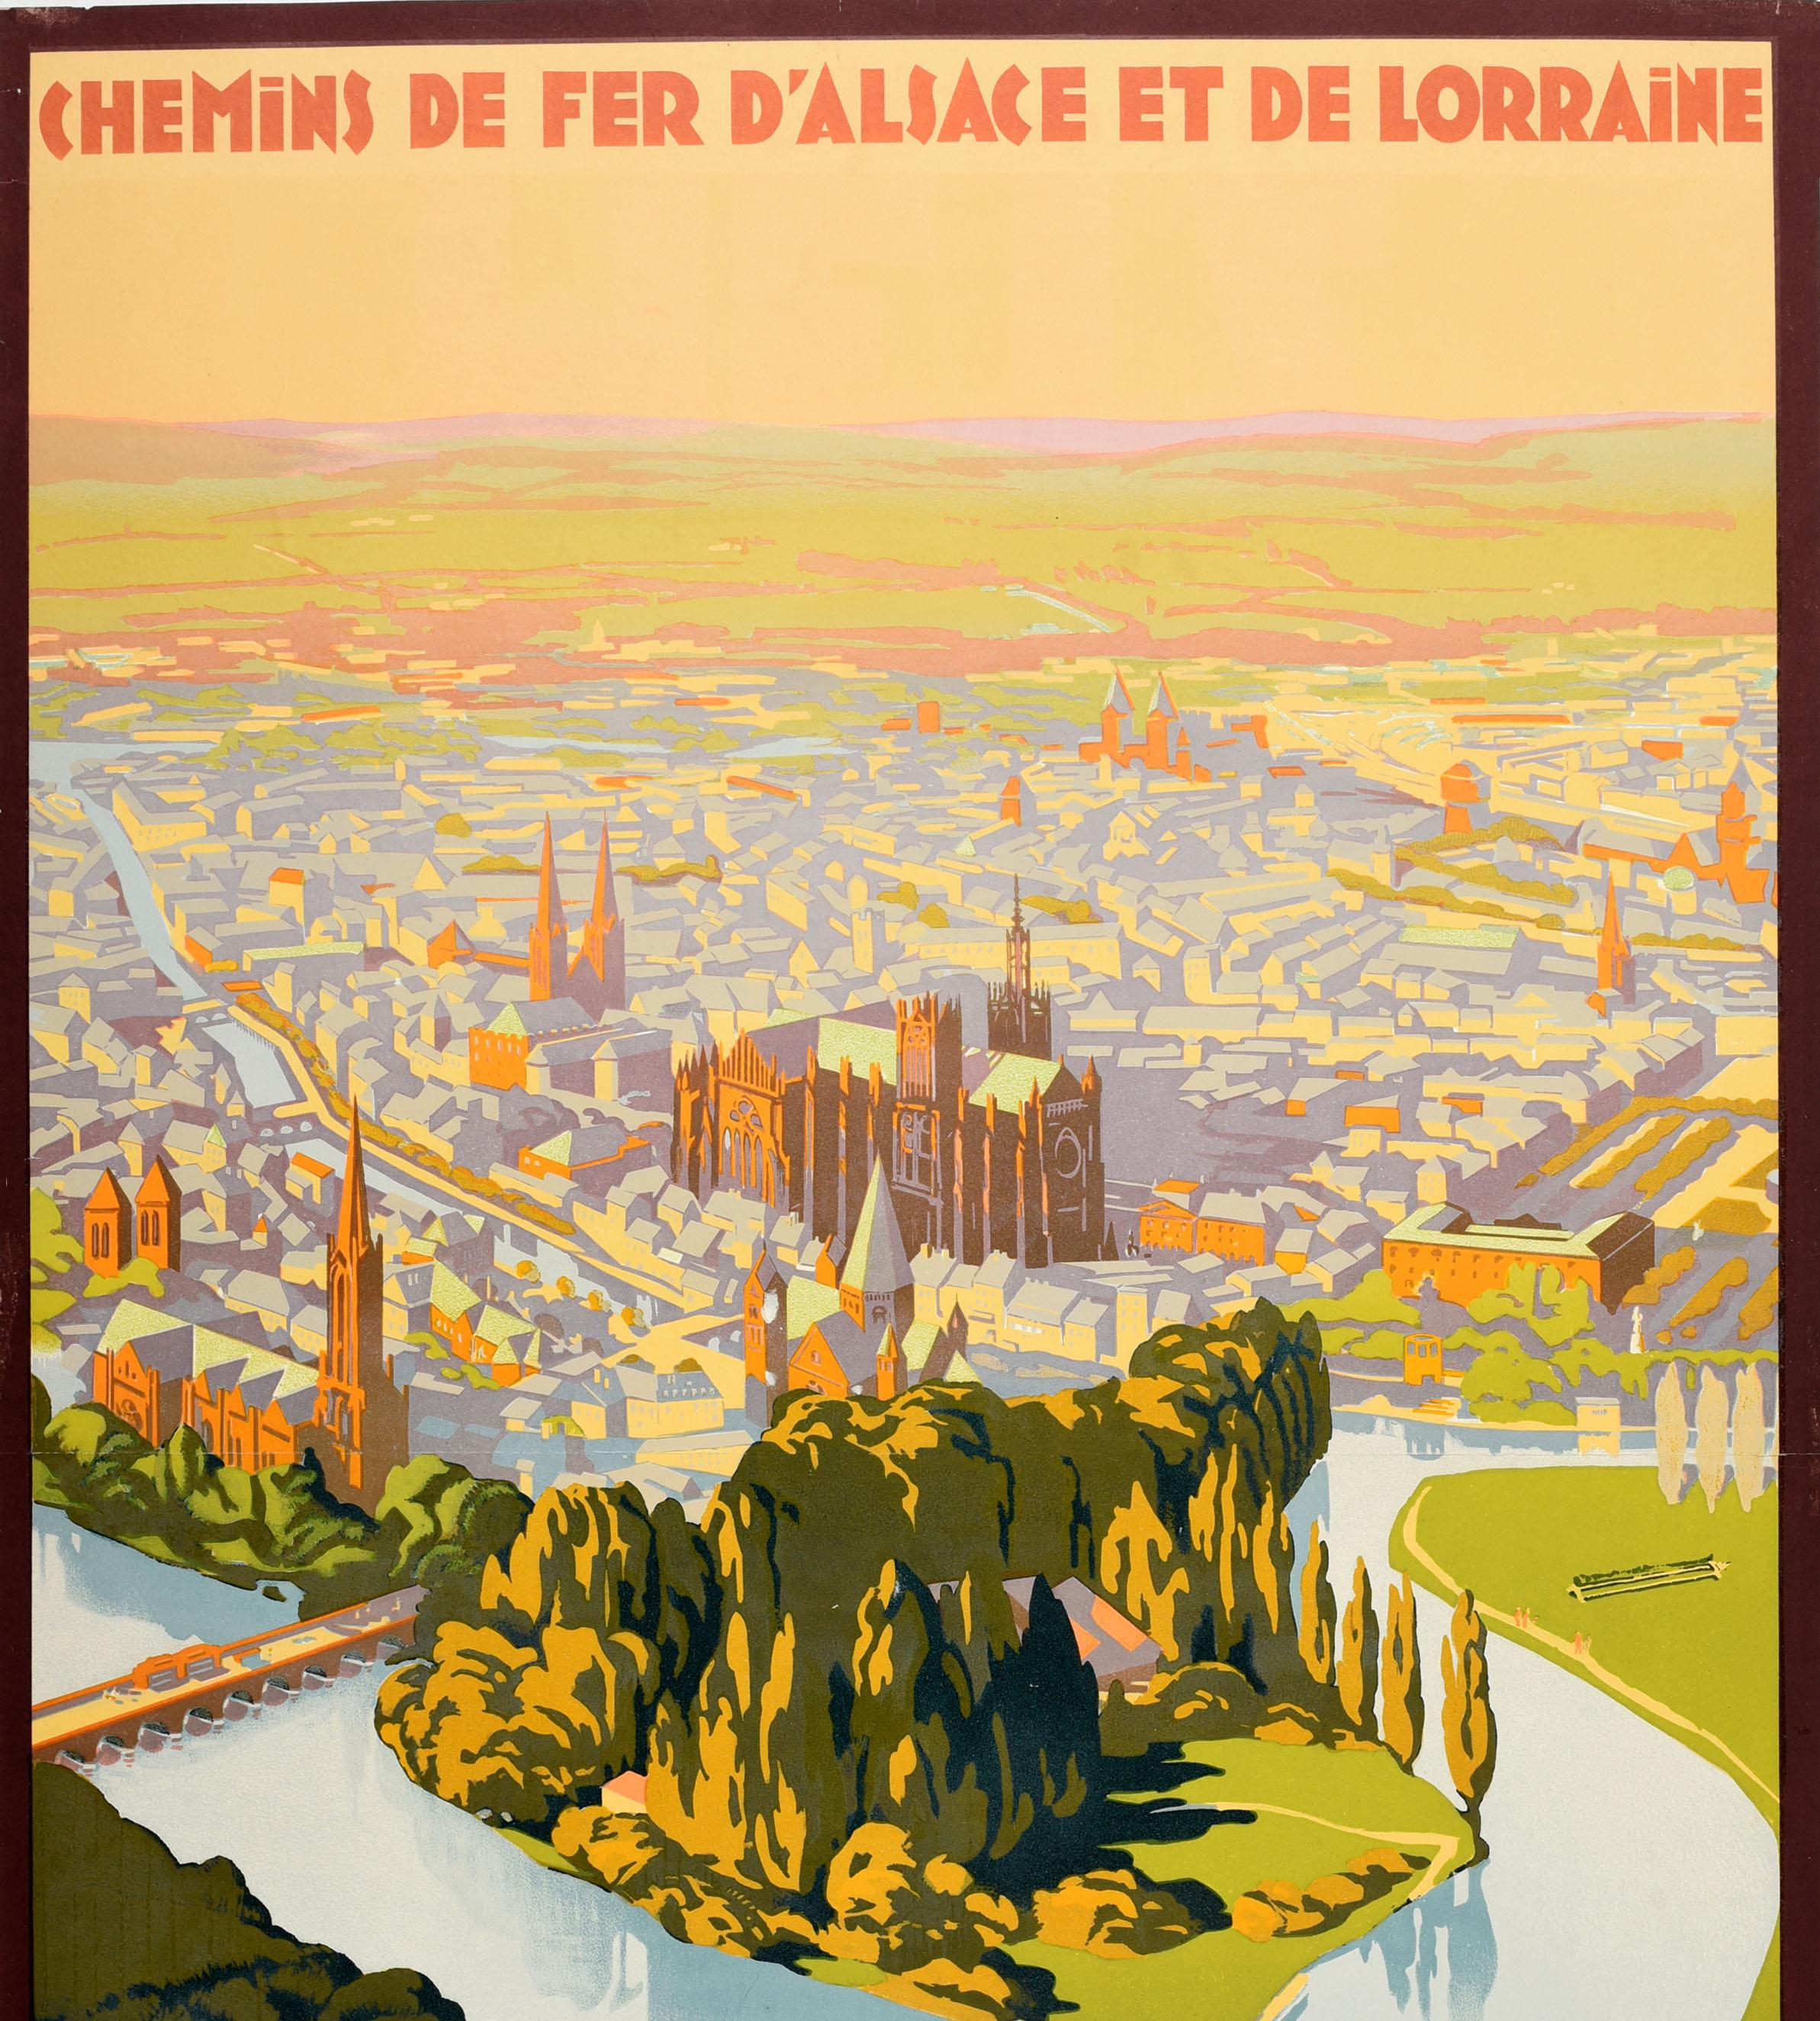 Original Vintage French Railway Travel Poster Metz Art Deco France Lorraine In Good Condition For Sale In London, GB